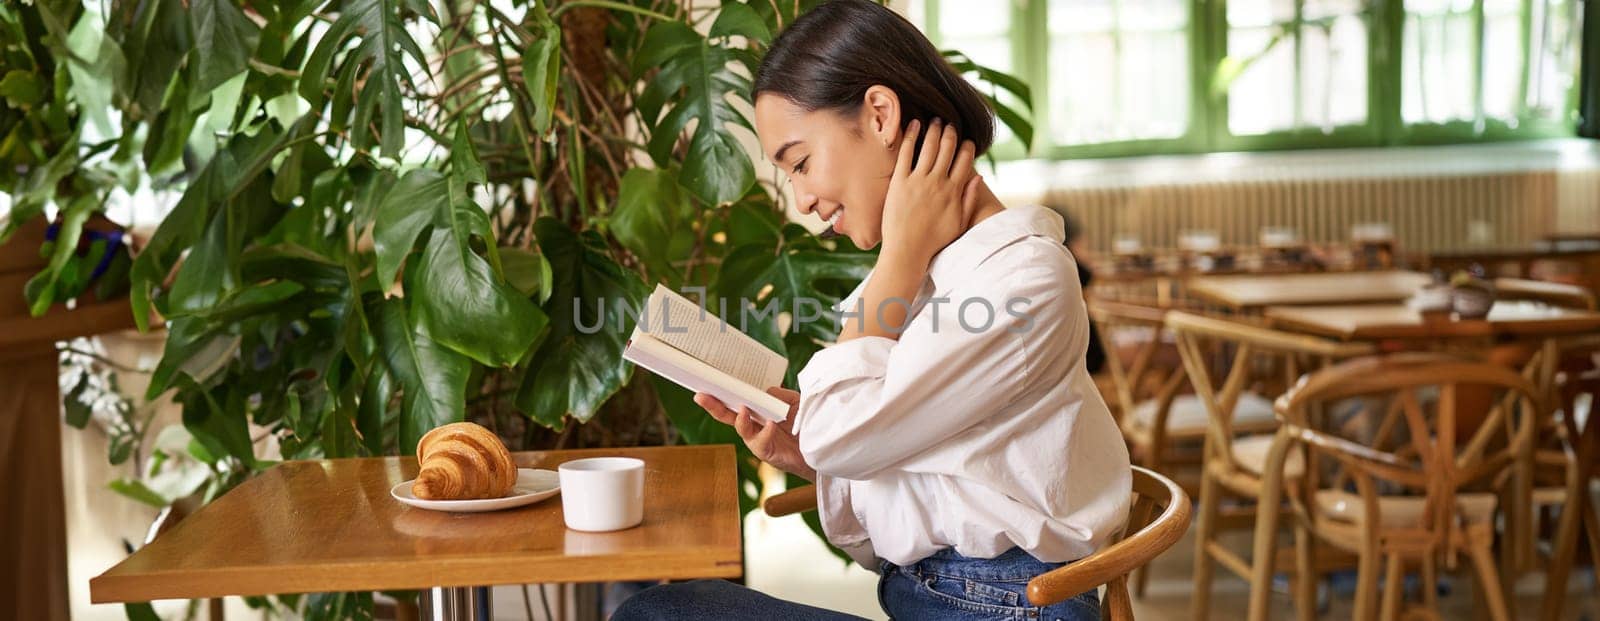 Tender, beautiful asian girl sitting with a book in cafe, reading and drinking coffee. People and lifestyle concept.